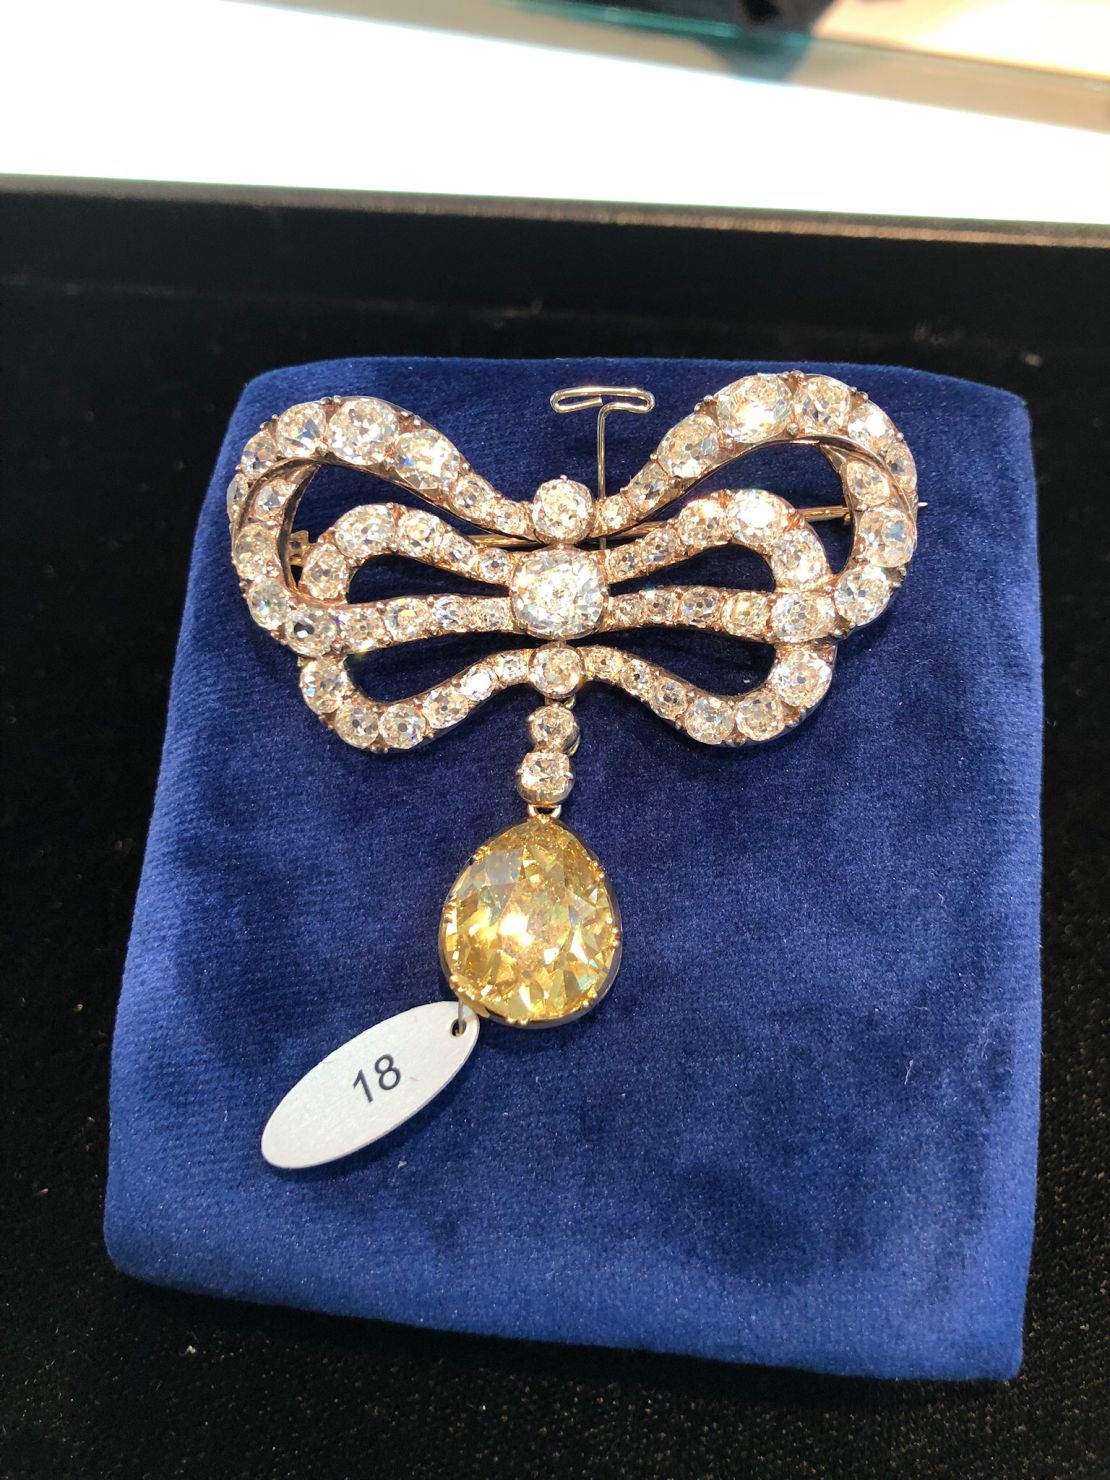 A diamond double ribbon bow brooch, also once owned by Marie Antoinette, sold for more than $2.1 million.